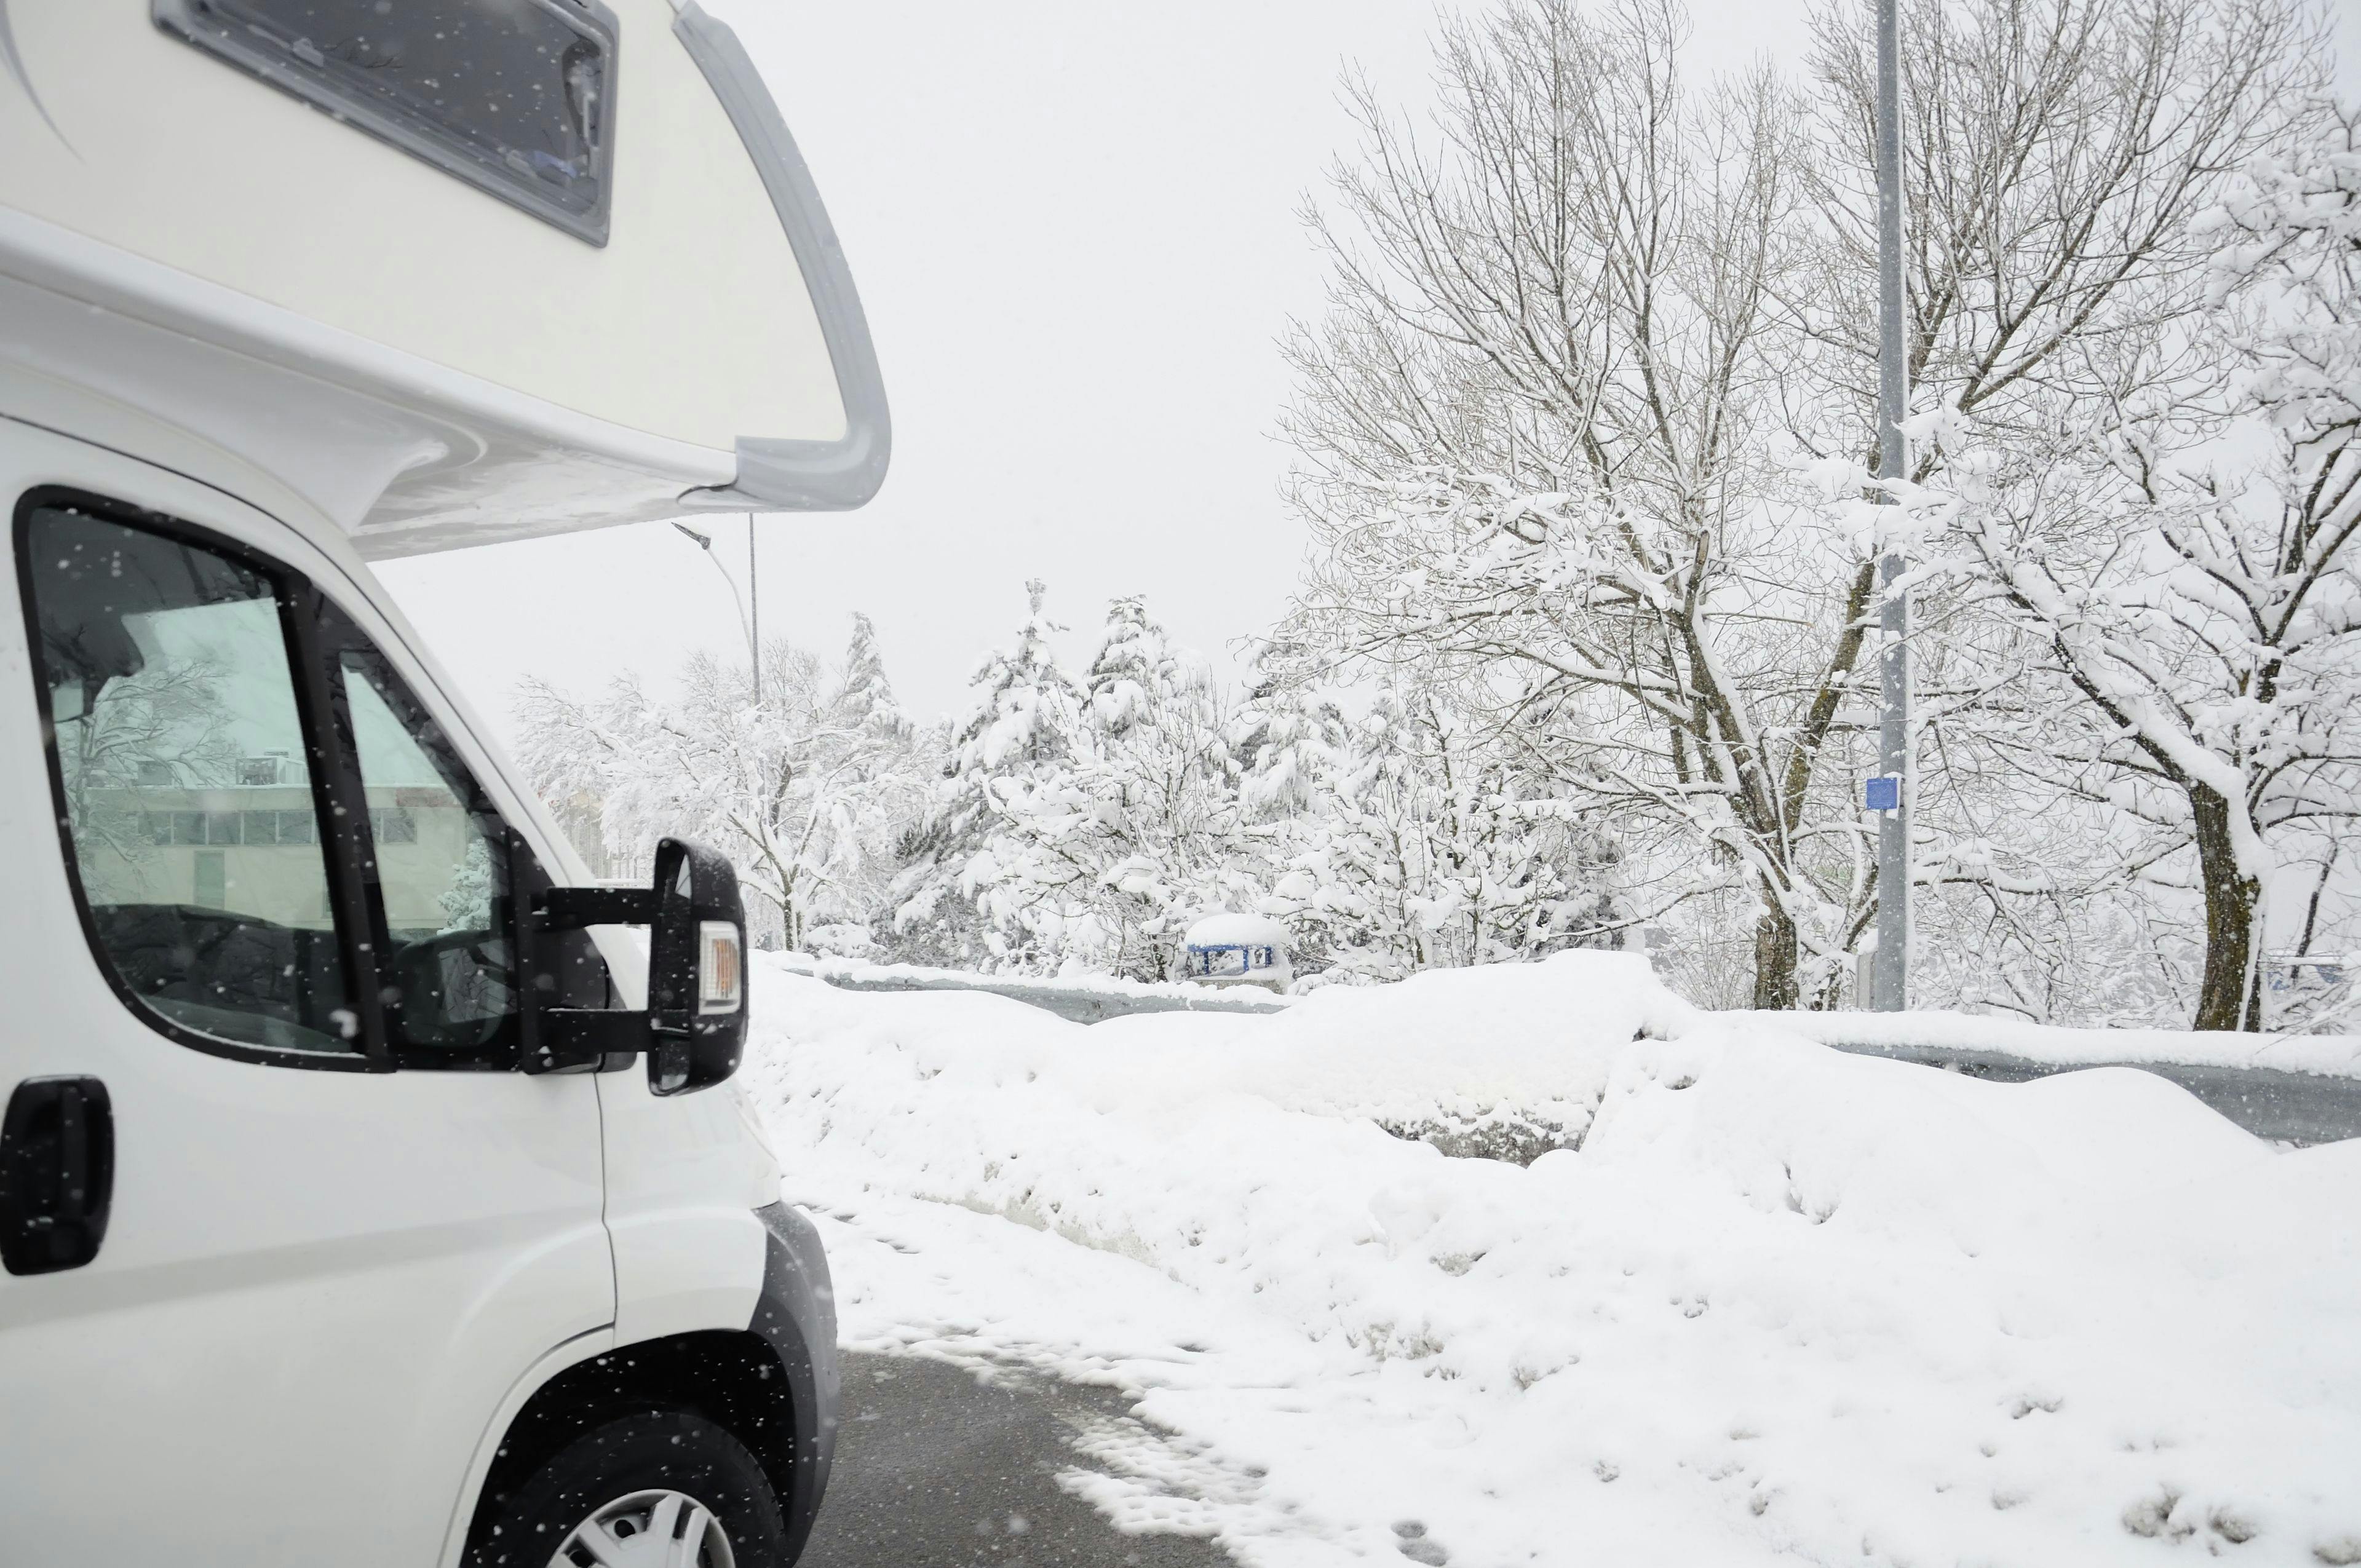 Campercontact country information - Motorhome in the snow